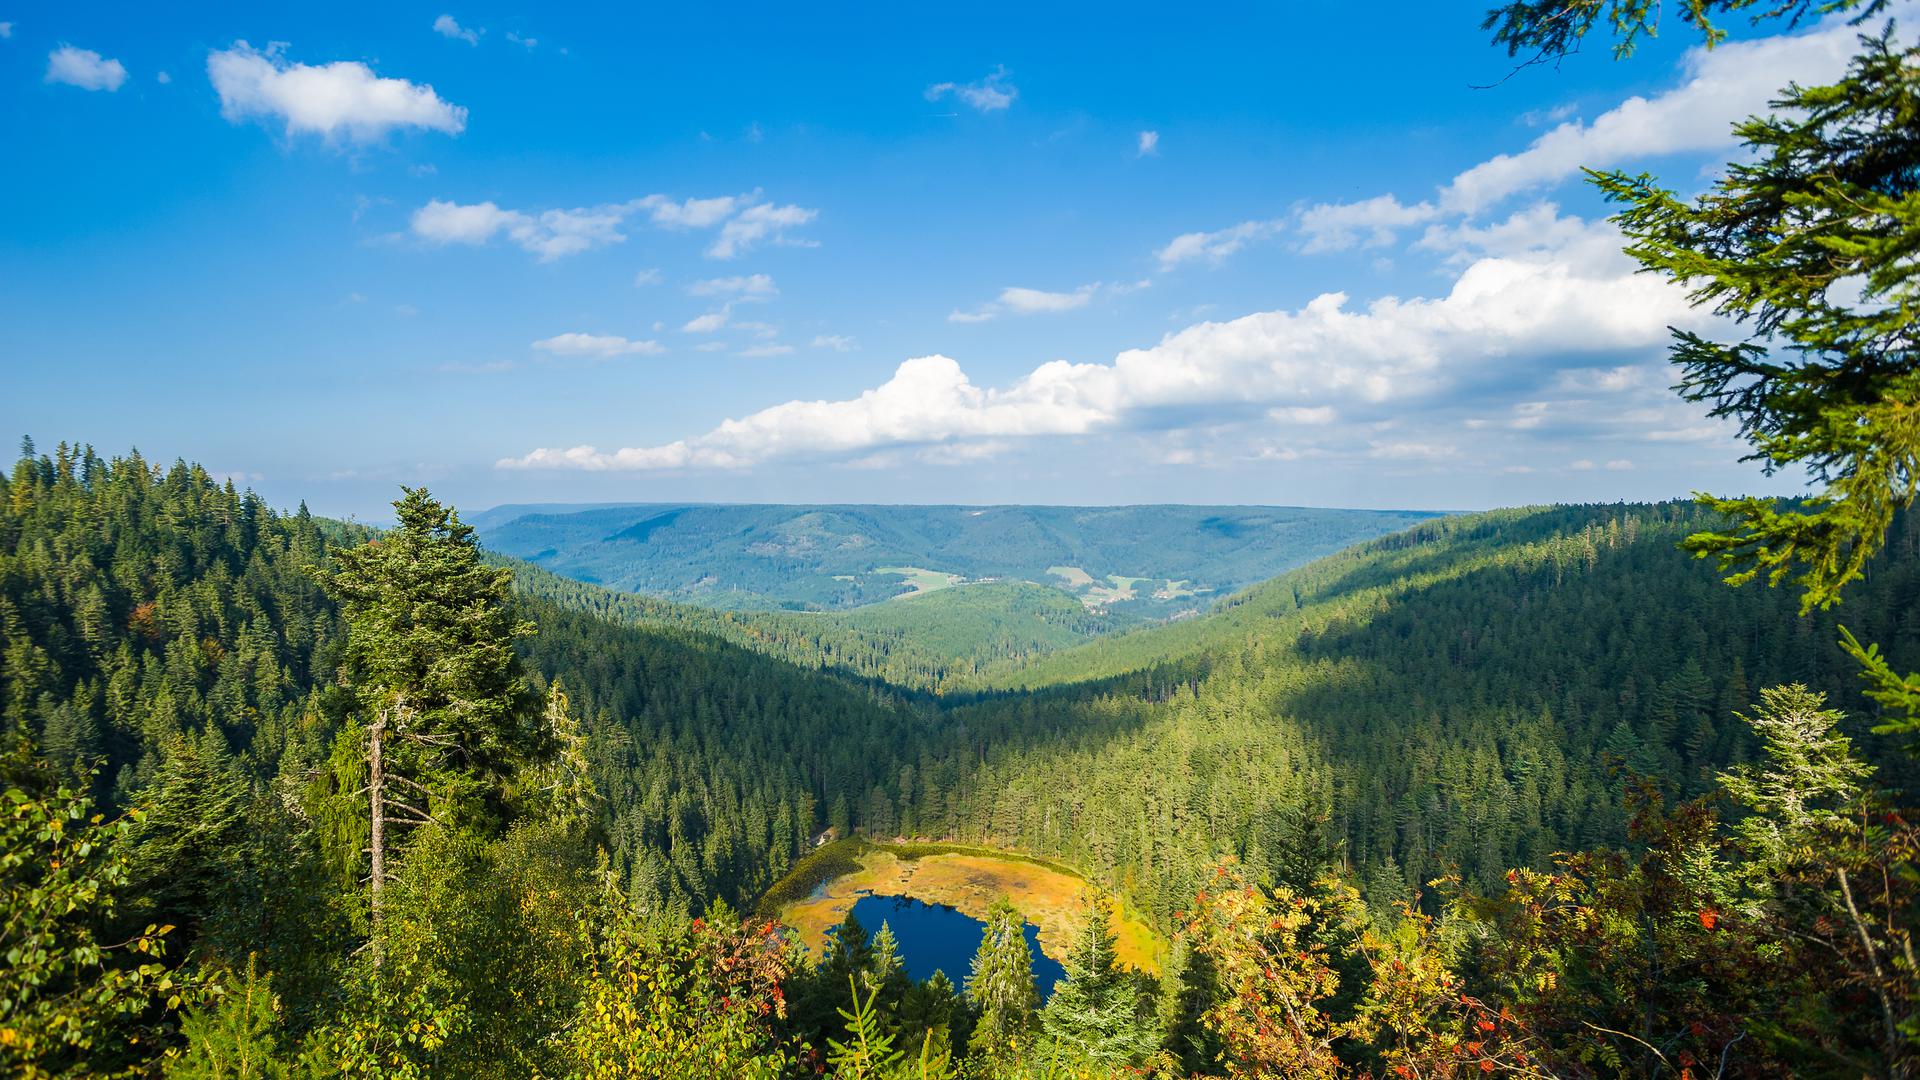 The Black Forest in Germany